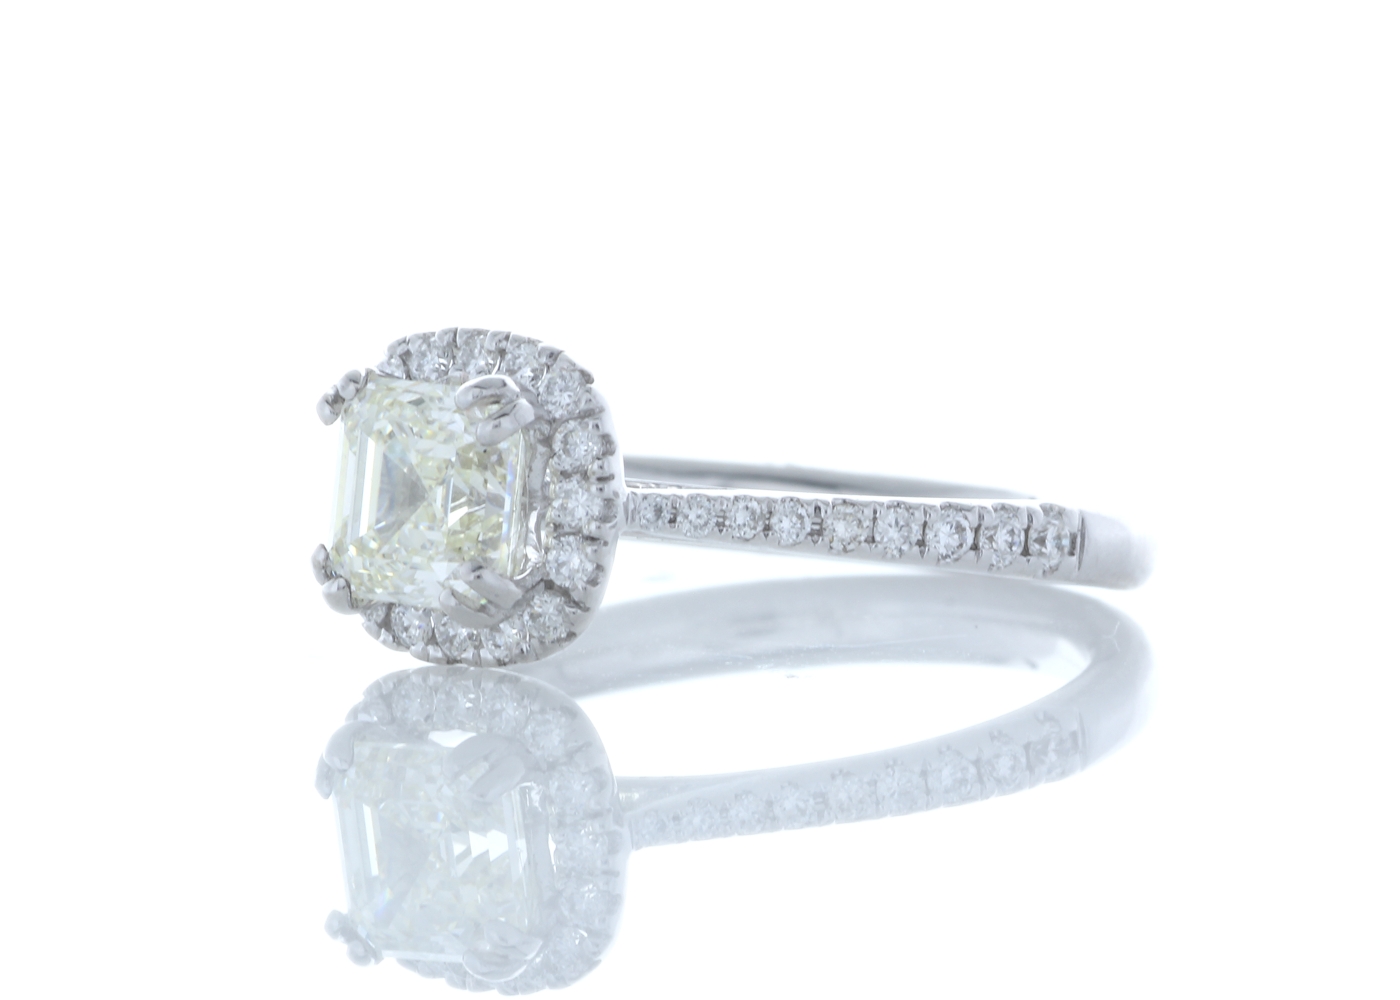 18ct White Gold Single Stone With Halo Setting Ring (1.01) 1.27 Carats - Image 2 of 6